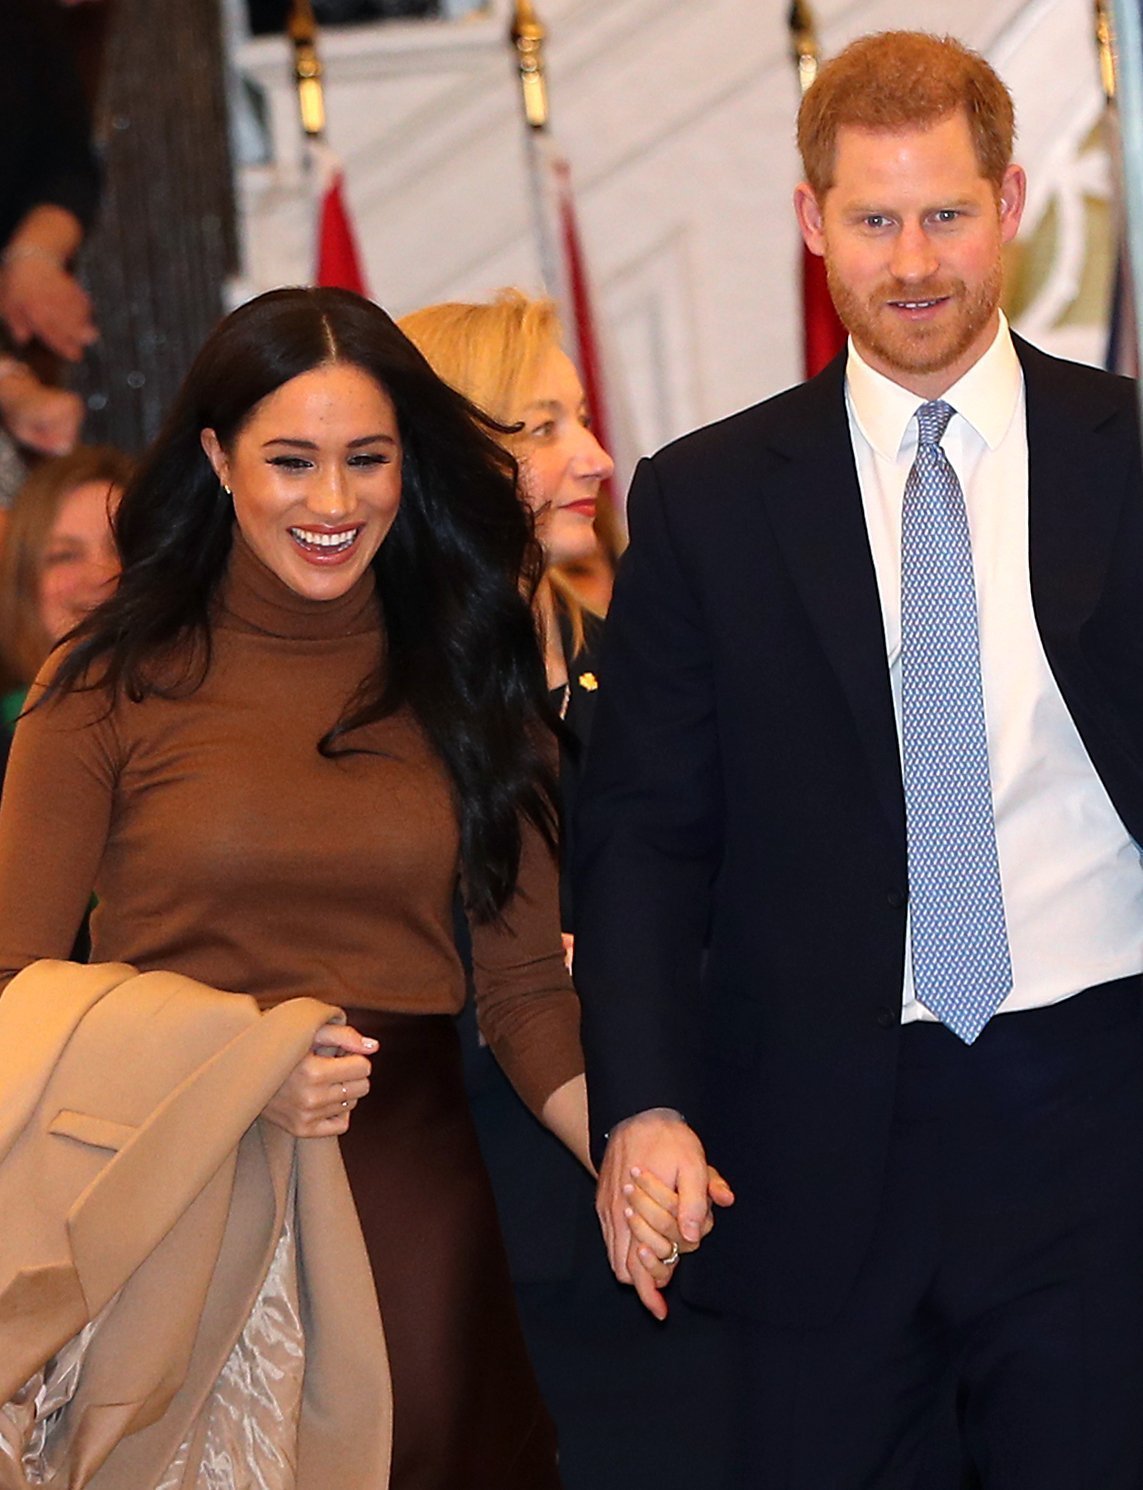 The Duke and Duchess of Sussex leaving after their visit to Canada House, central London, to meet with Canada's High Commissioner to the UK, Janice Charette, as well as staff, to thank them for the warm hospitality and support they received during their recent stay in Canada. Picture date: Tuesday January 7, 2020|Photo: Getty Images